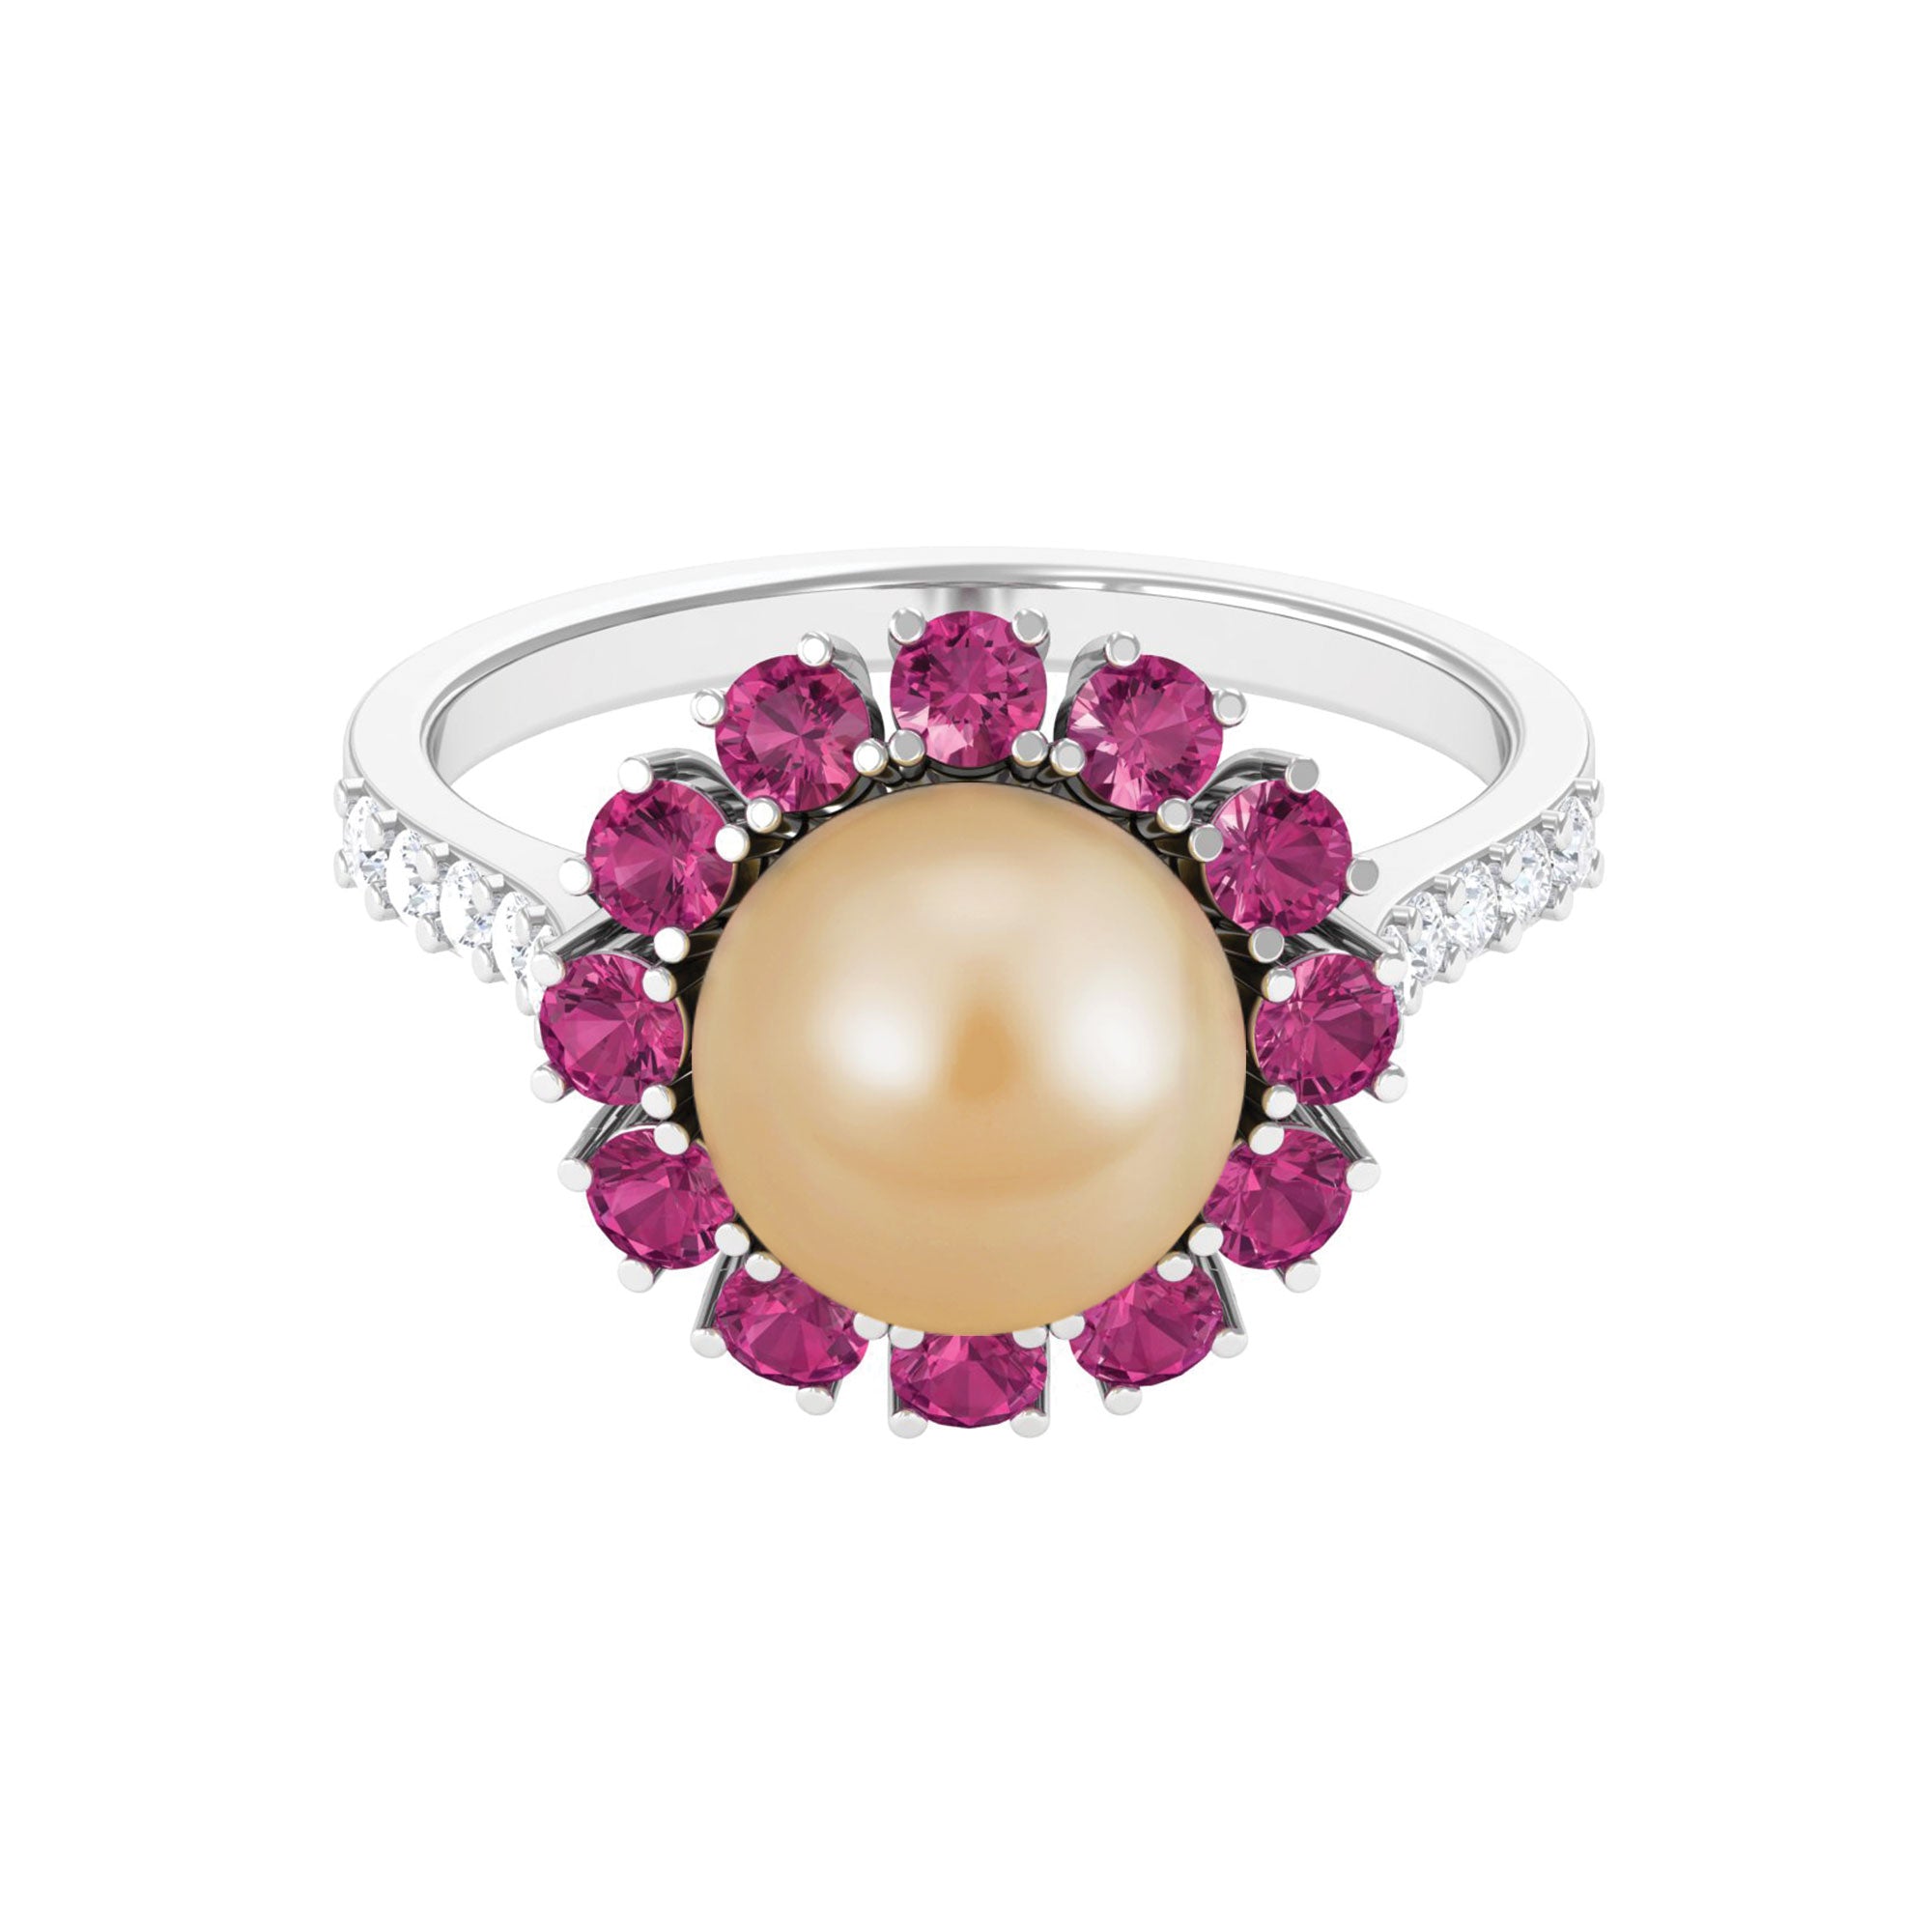 Natural Golden South Sea Pearl Halo Ring with Tourmaline South Sea Pearl-AAA Quality - Arisha Jewels